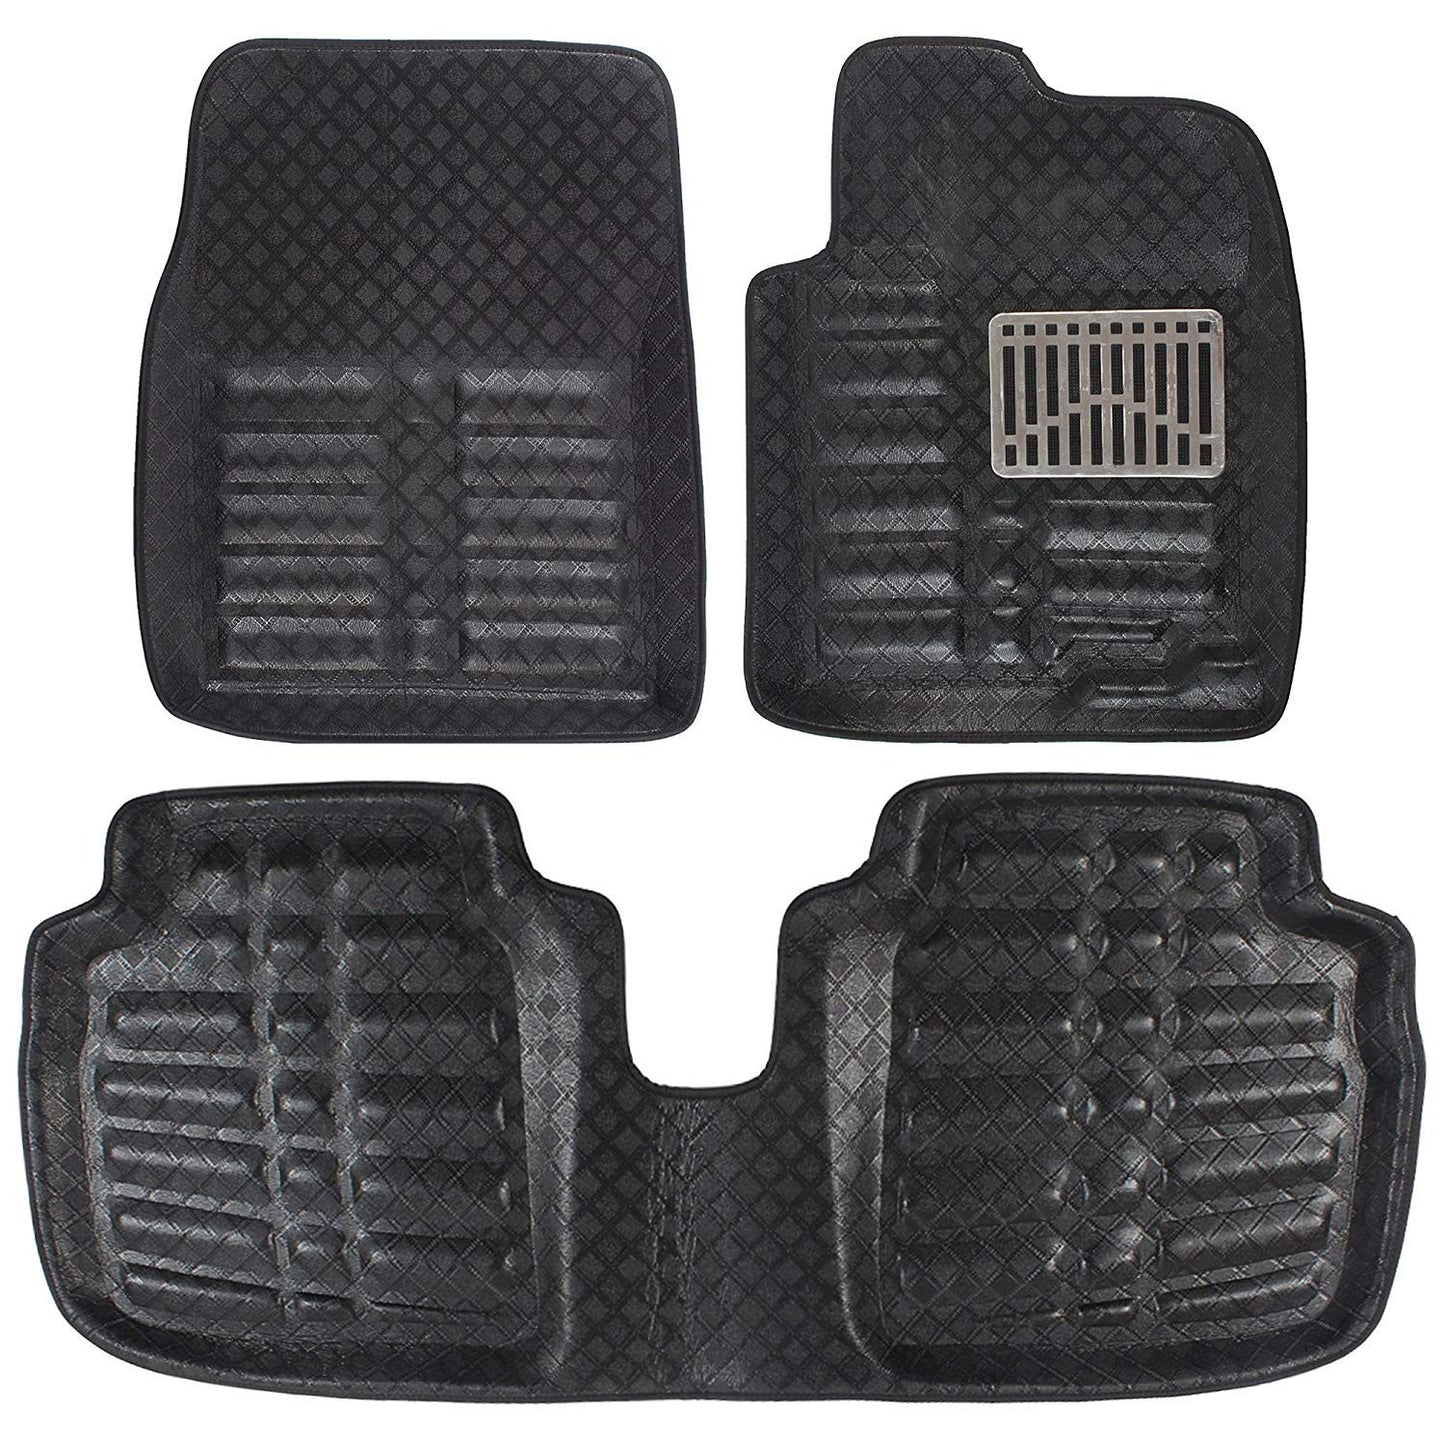 Oshotto 4D Artificial Leather Car Floor Mats For Maruti Suzuki Ertiga 2018-2023 - Set of 5 (Complete Mat with 3rd Row and Dicky) - Black